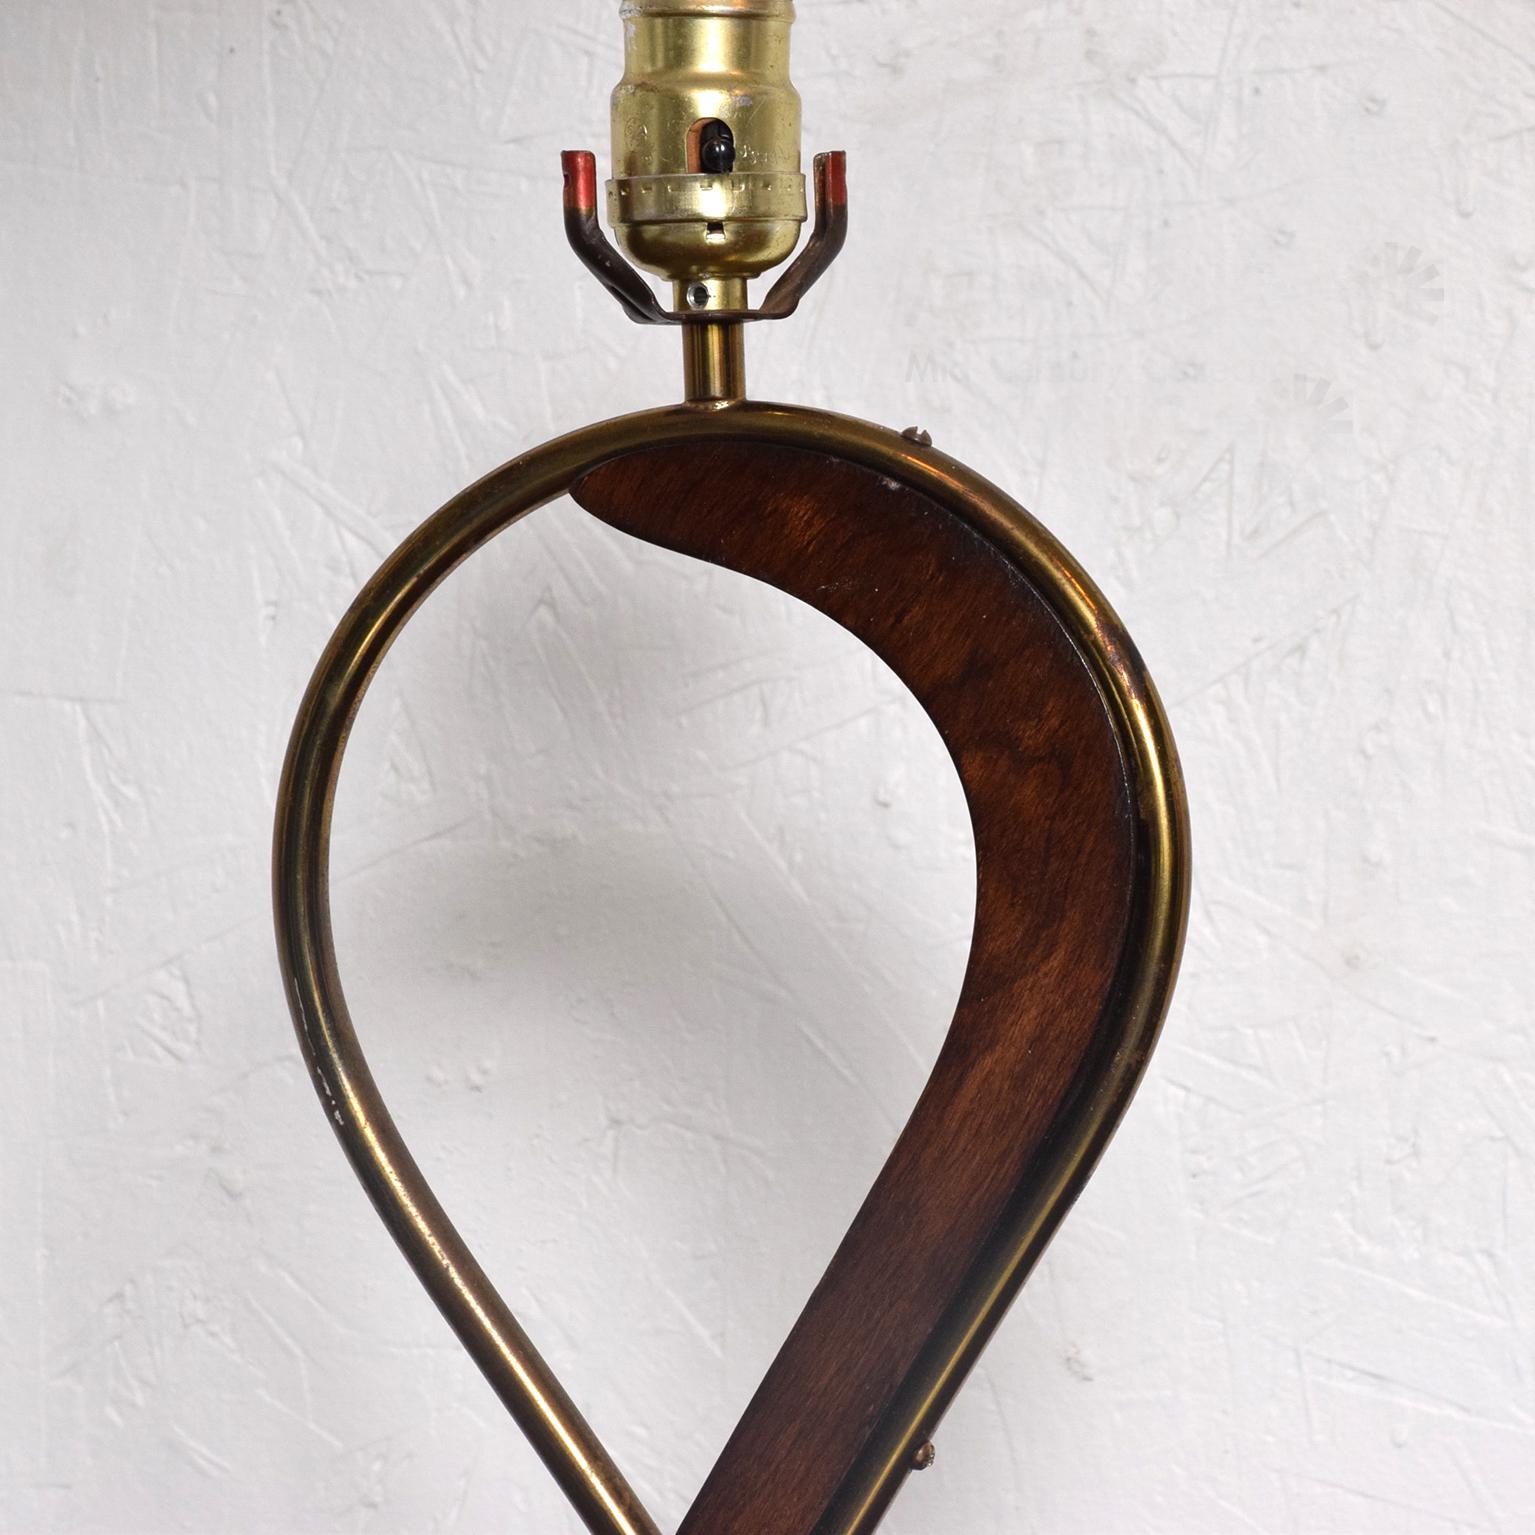 Sculptural Table Lamps Eugenio Escudero 1950s Mexican Modern Mahogany and Brass 2